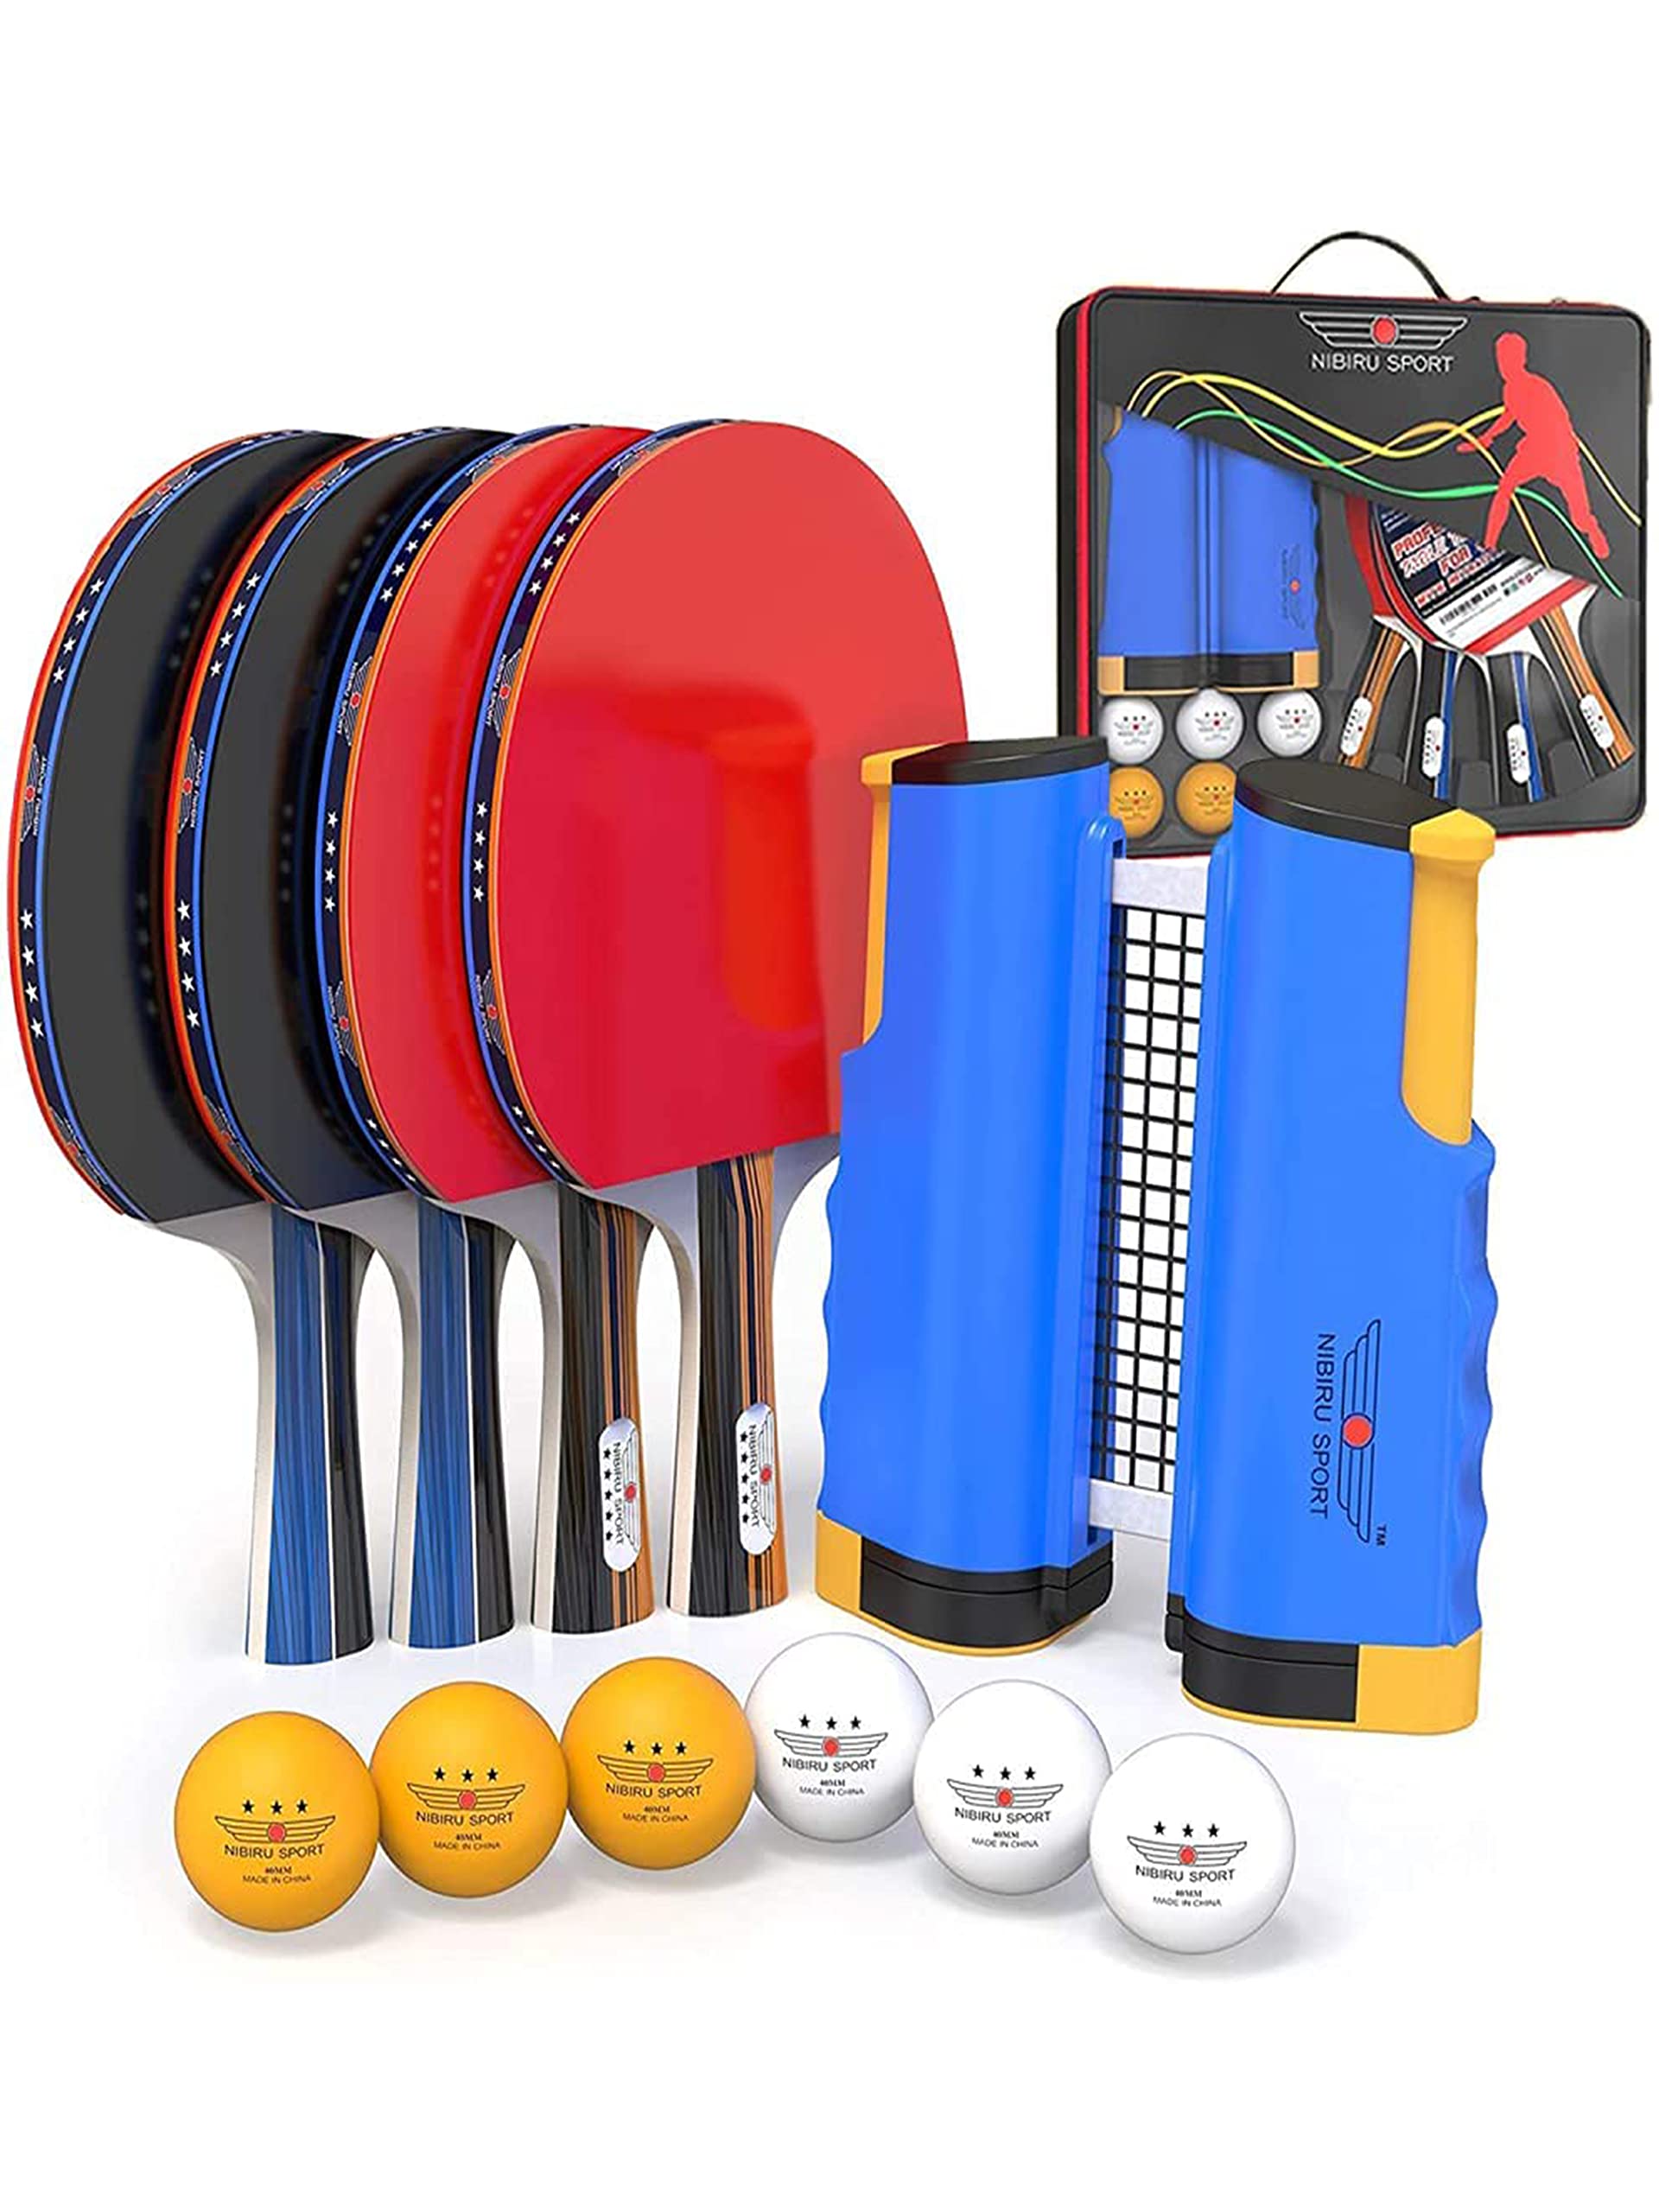 Forkludret Enhed jeg lytter til musik NIBIRU SPORT Ping Pong Paddles Set - Professional Table Tennis Rackets and  Balls, Retractable Net with Posts and Storage Case - Pingpong Paddle and  Game Table Accessories 4 Player Complete Set